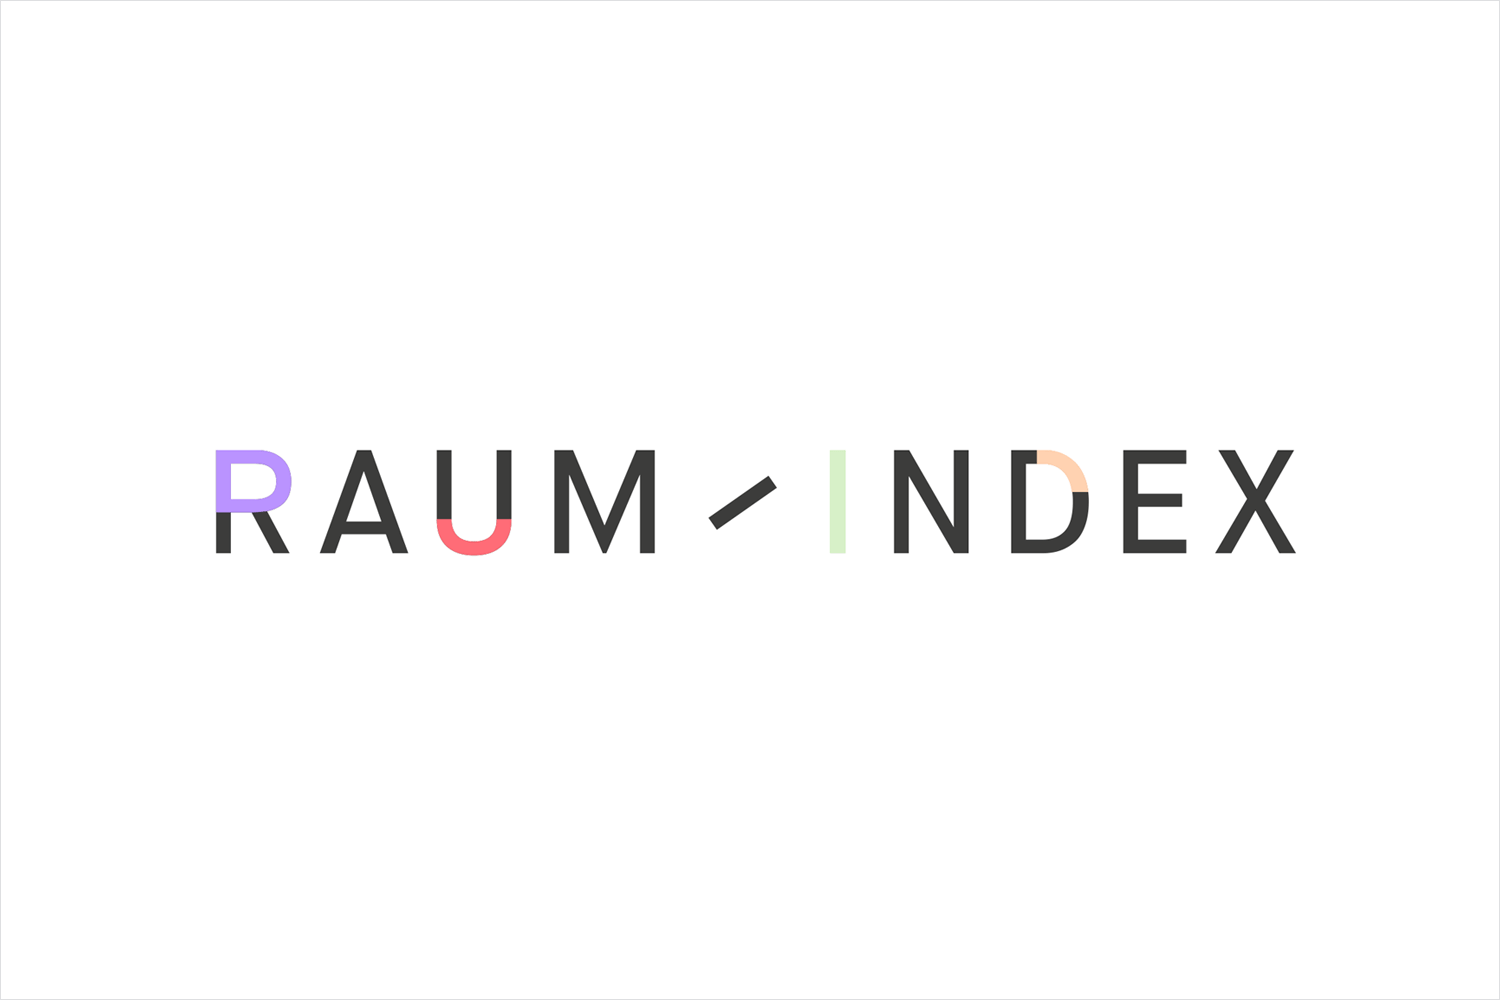 Logotype by Graz and Wien-based Moodley for Austrian shop design studio Raumindex